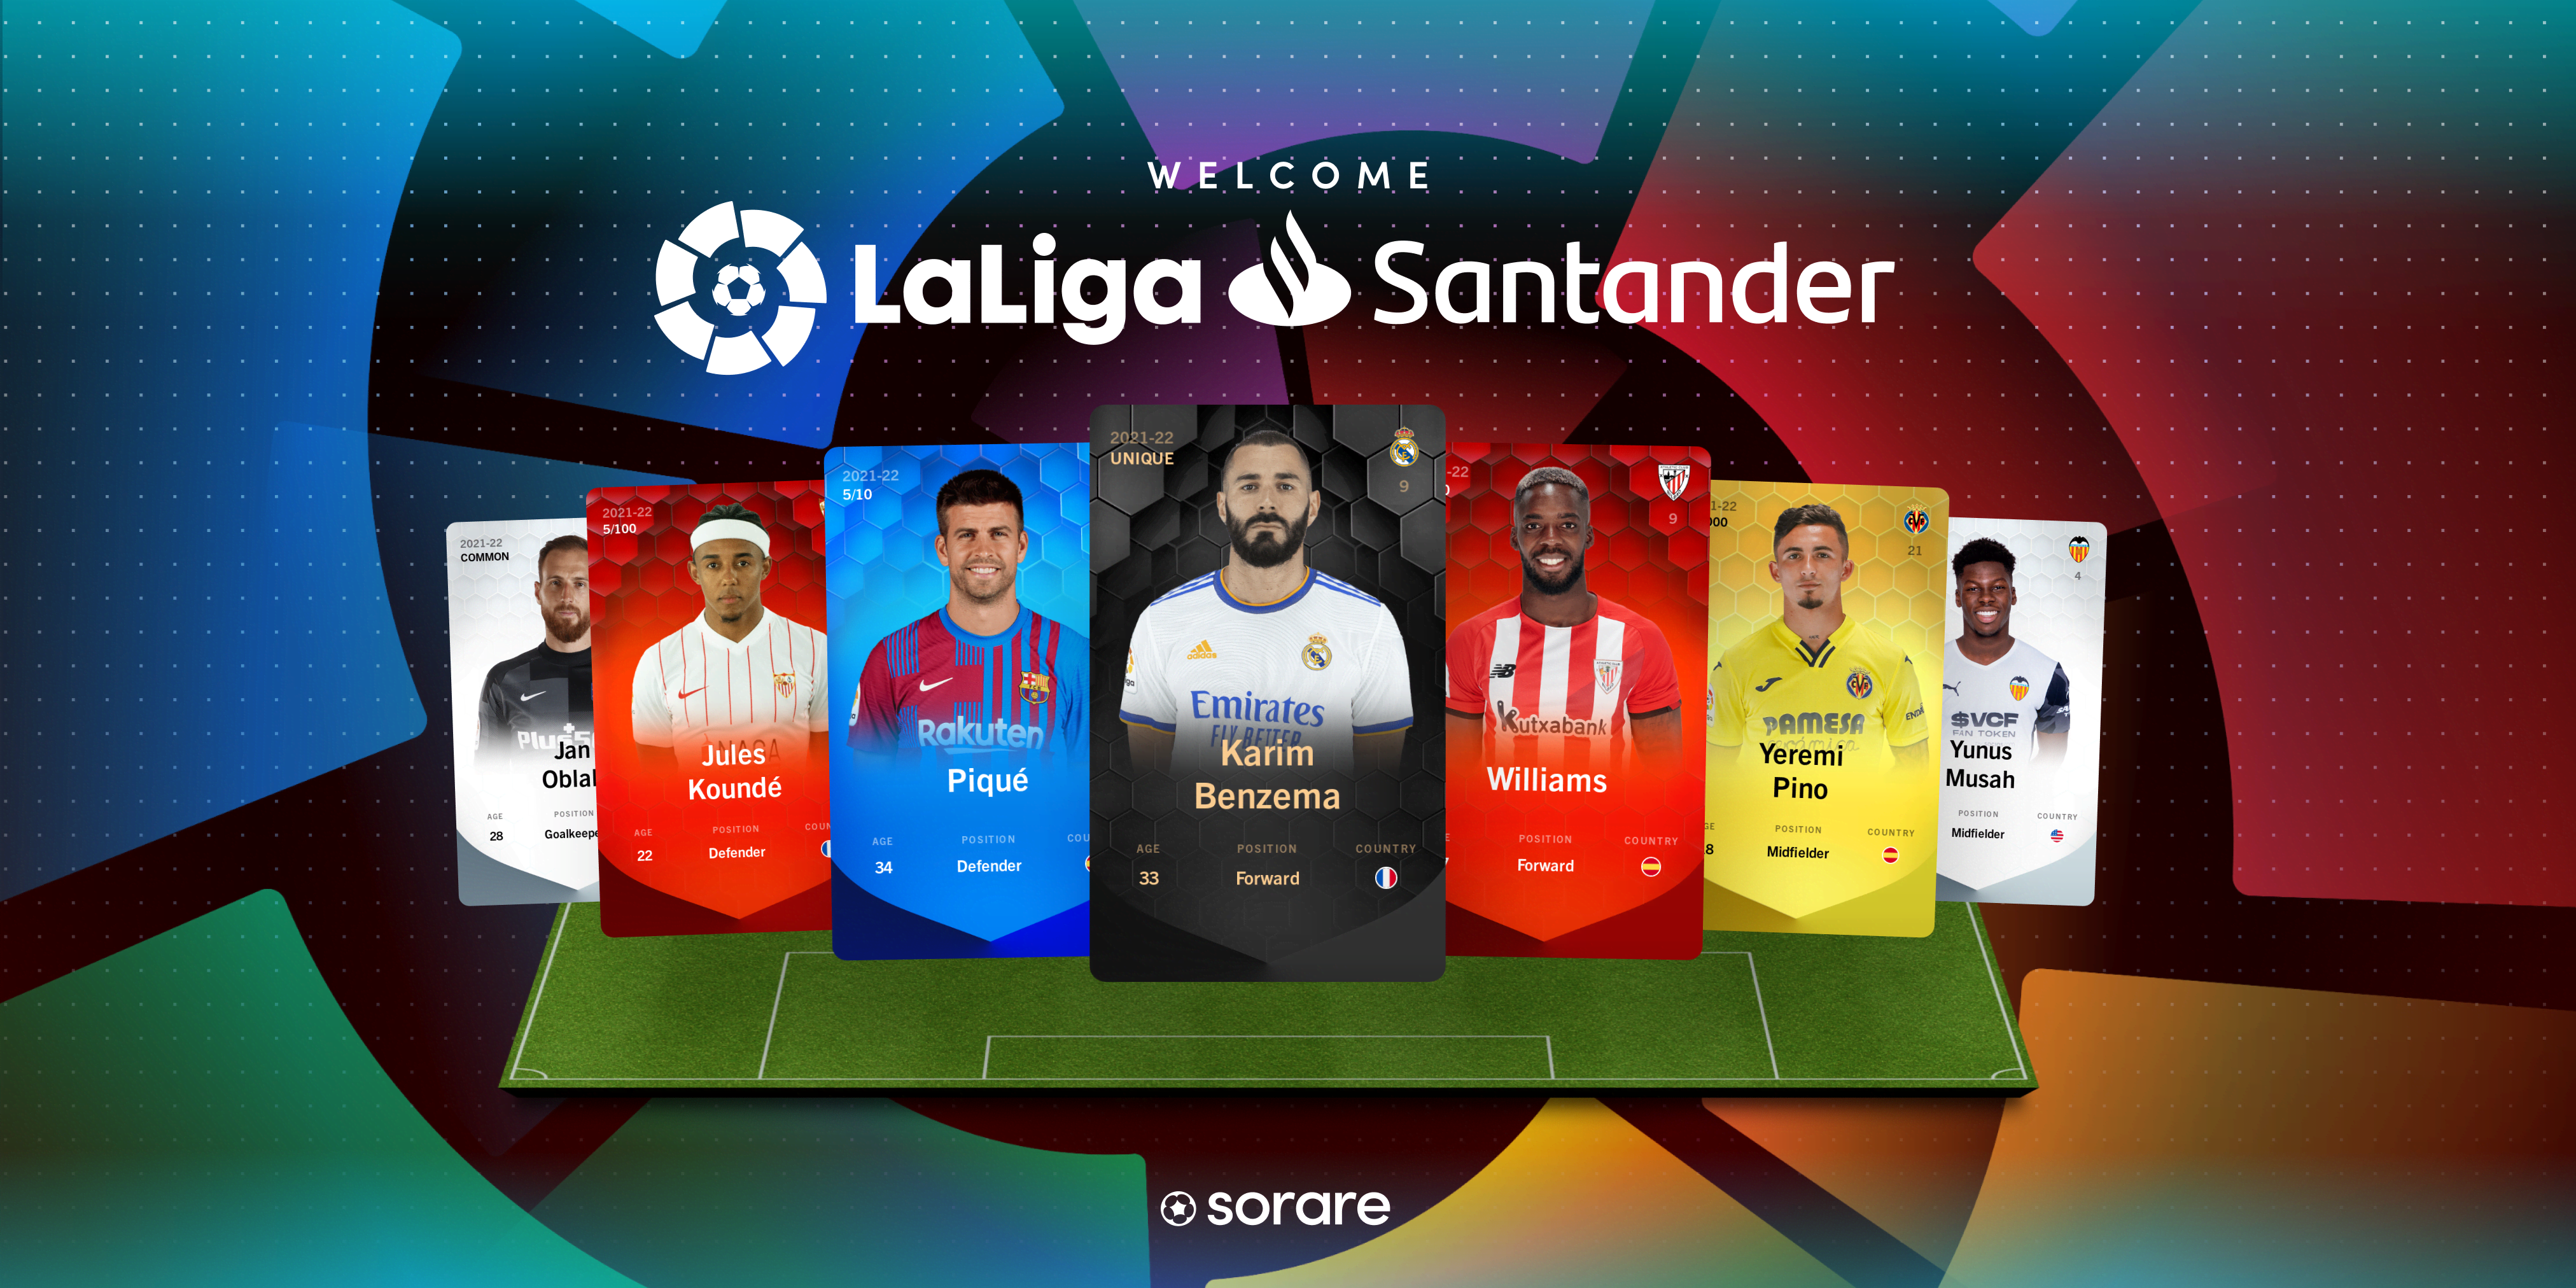 Spain's top soccer league is launching NFT fantasy football cards for all its players